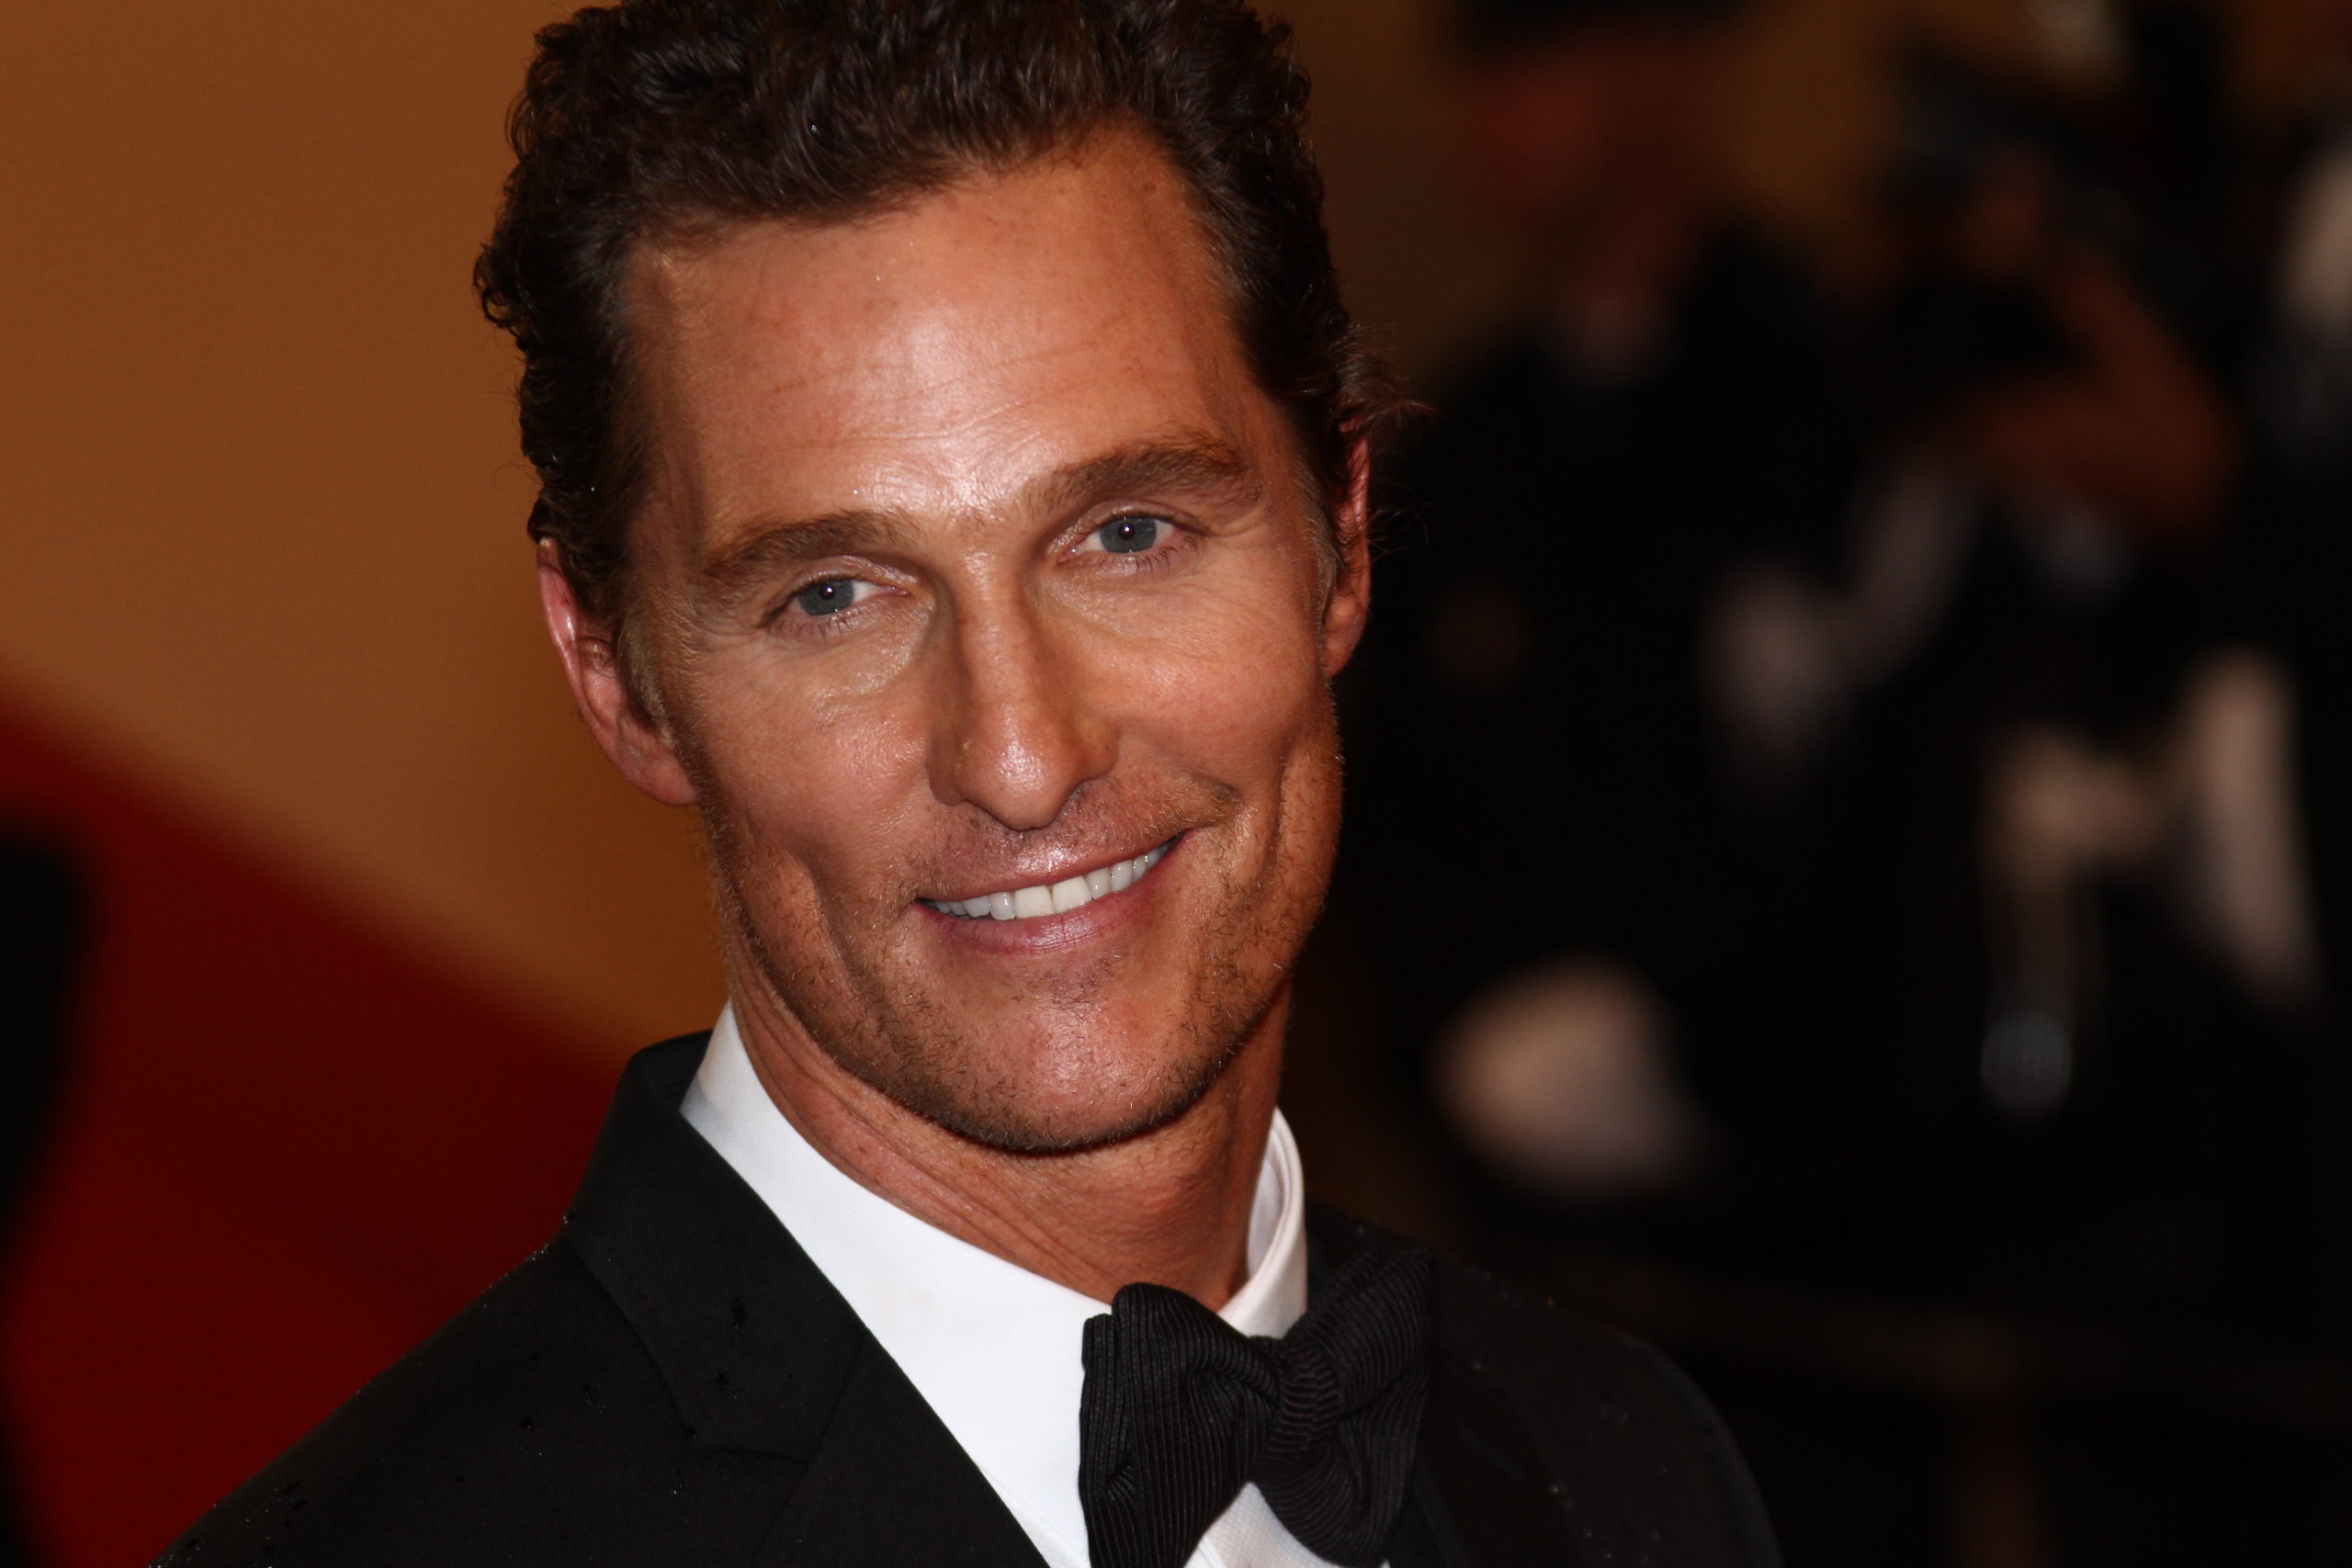 Polls Show Texans Like the Idea of Matthew McConaughey for Governor. Ranked Choice Voting Could Help